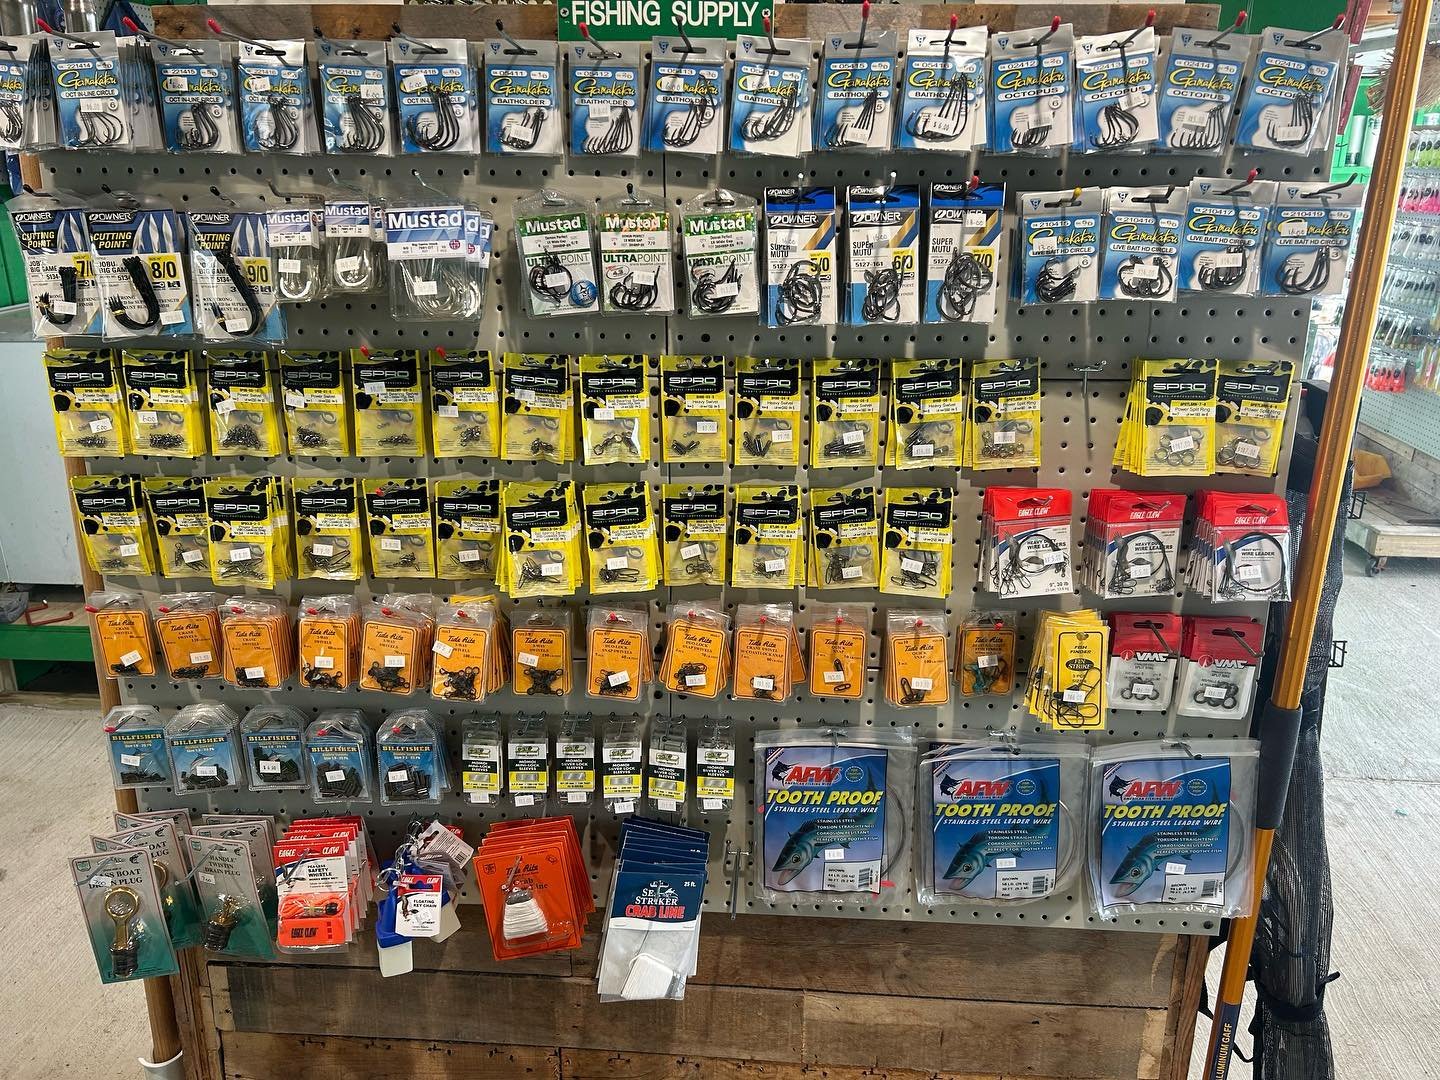 Big restock on Terminal Tackle, Leader, and Weight! Vans is your one stop shop for fuel, tackle, ice, bait, and most importantly Local Knowledge! Our employees are always more than happy to point you in the right direction and put you on the bite!! 8